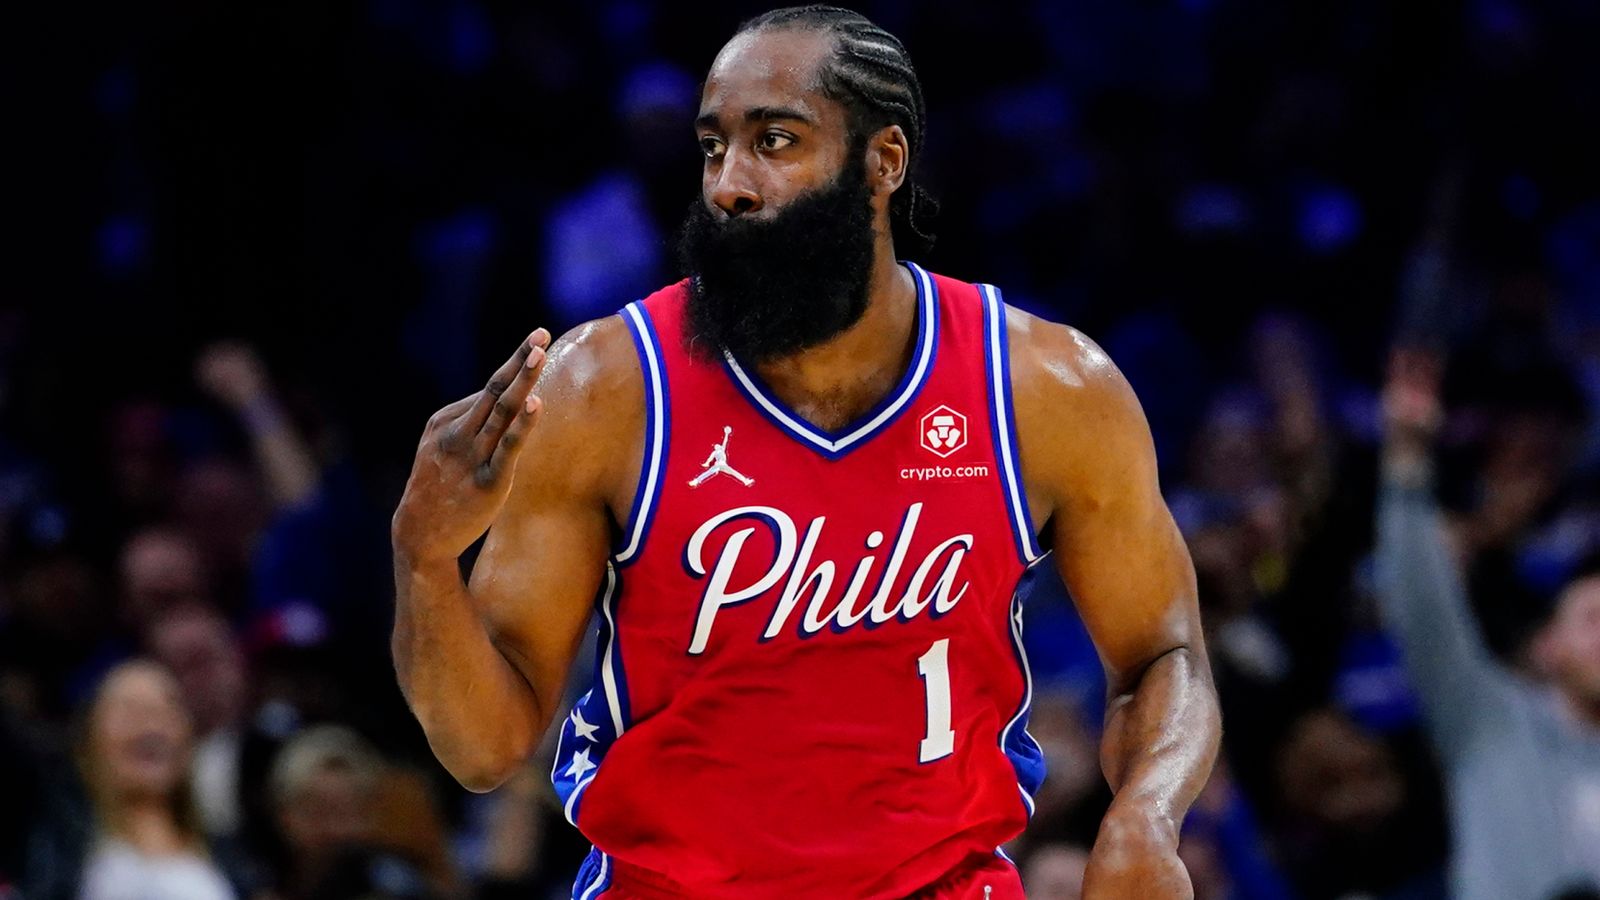 James Harden: Philadelphia 76ers pay cut deal agreed as guard looking to have ‘unbelievable’ year after letting Sixers build contender